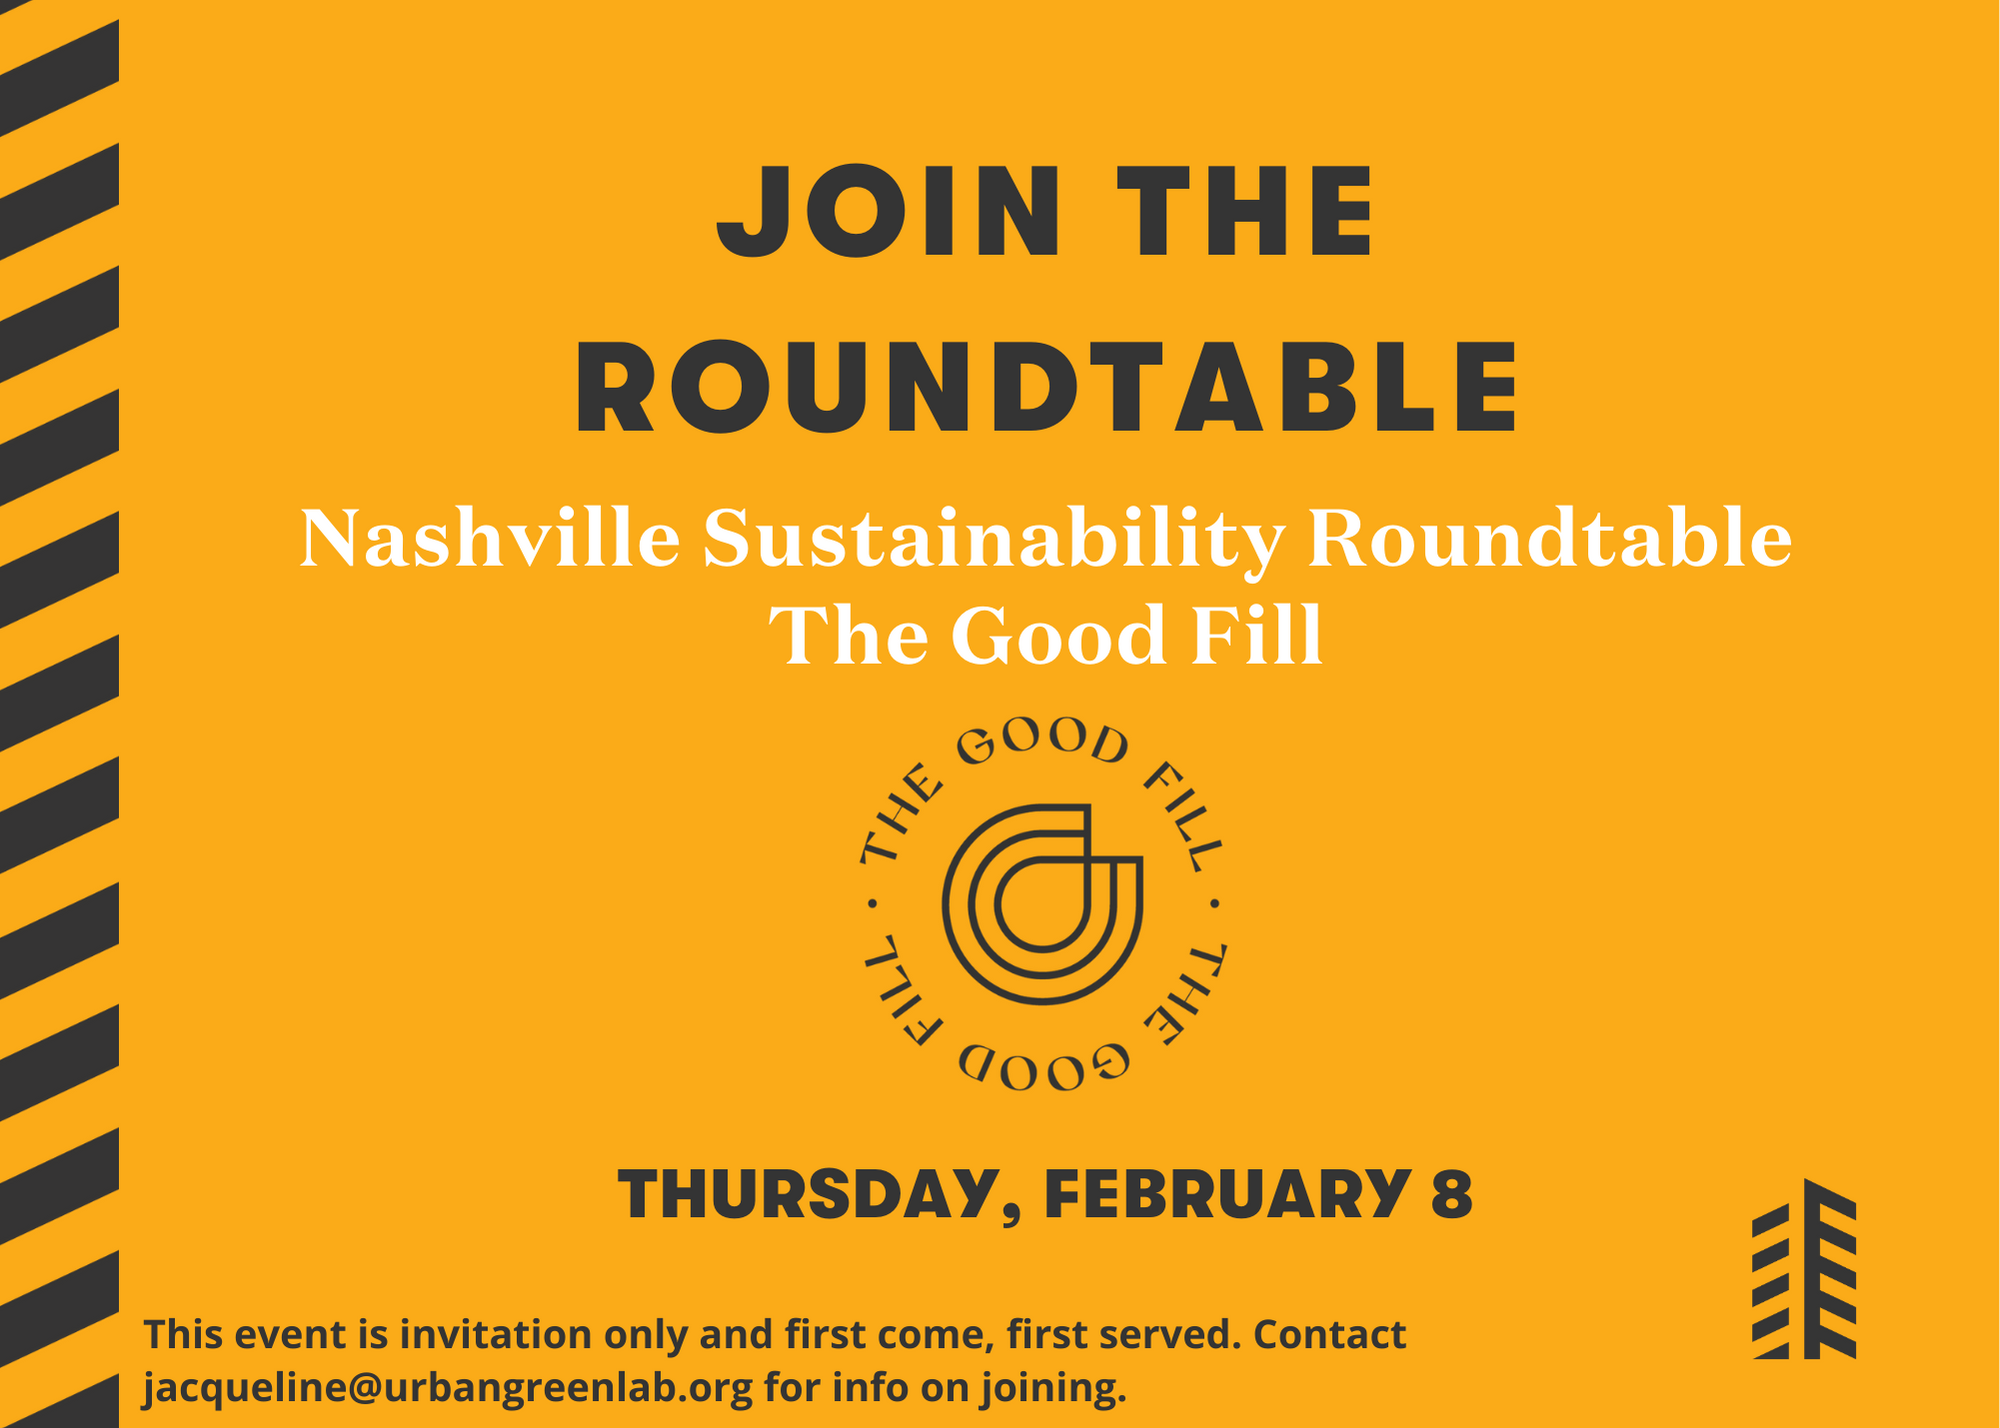 Graphic to promote the Nashville Sustainability Roundtable on February 8 with The Good Fill